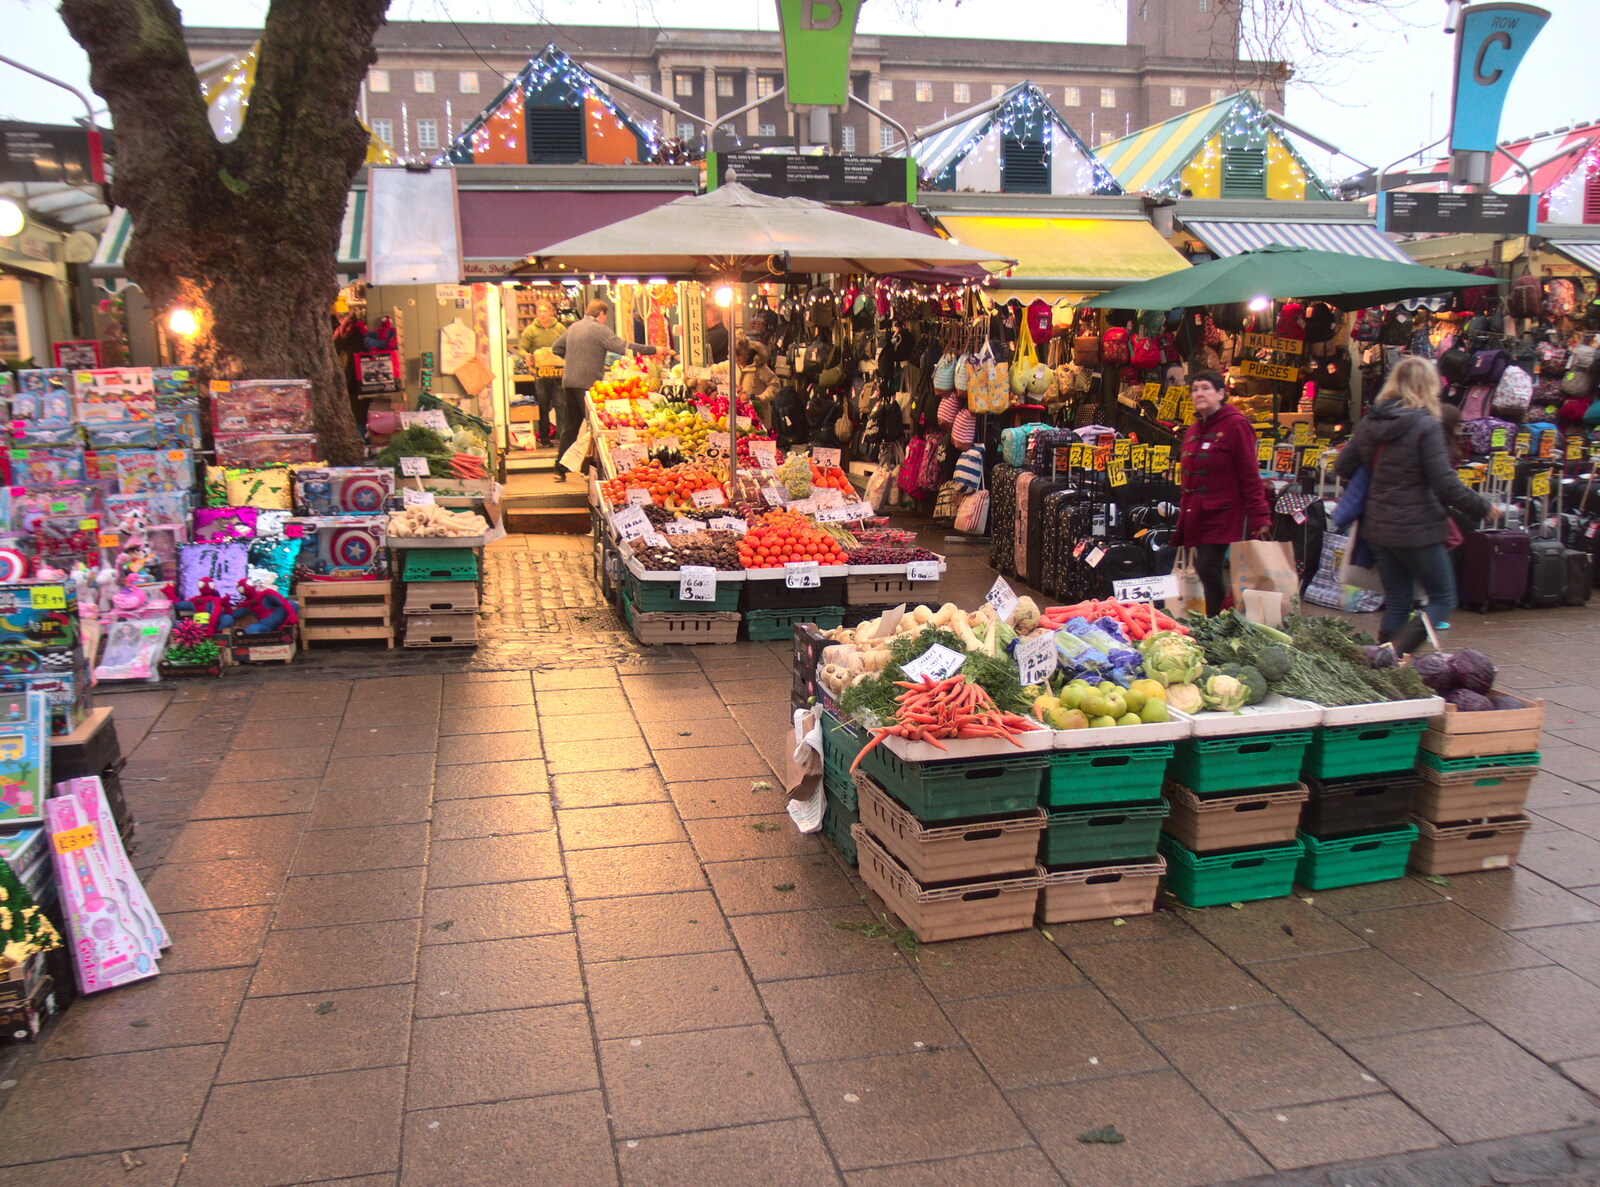 Festive fruit-and-veg market stall from A Spot of Christmas Shopping, Norwich and Diss, Norfolk - 23rd December 2017